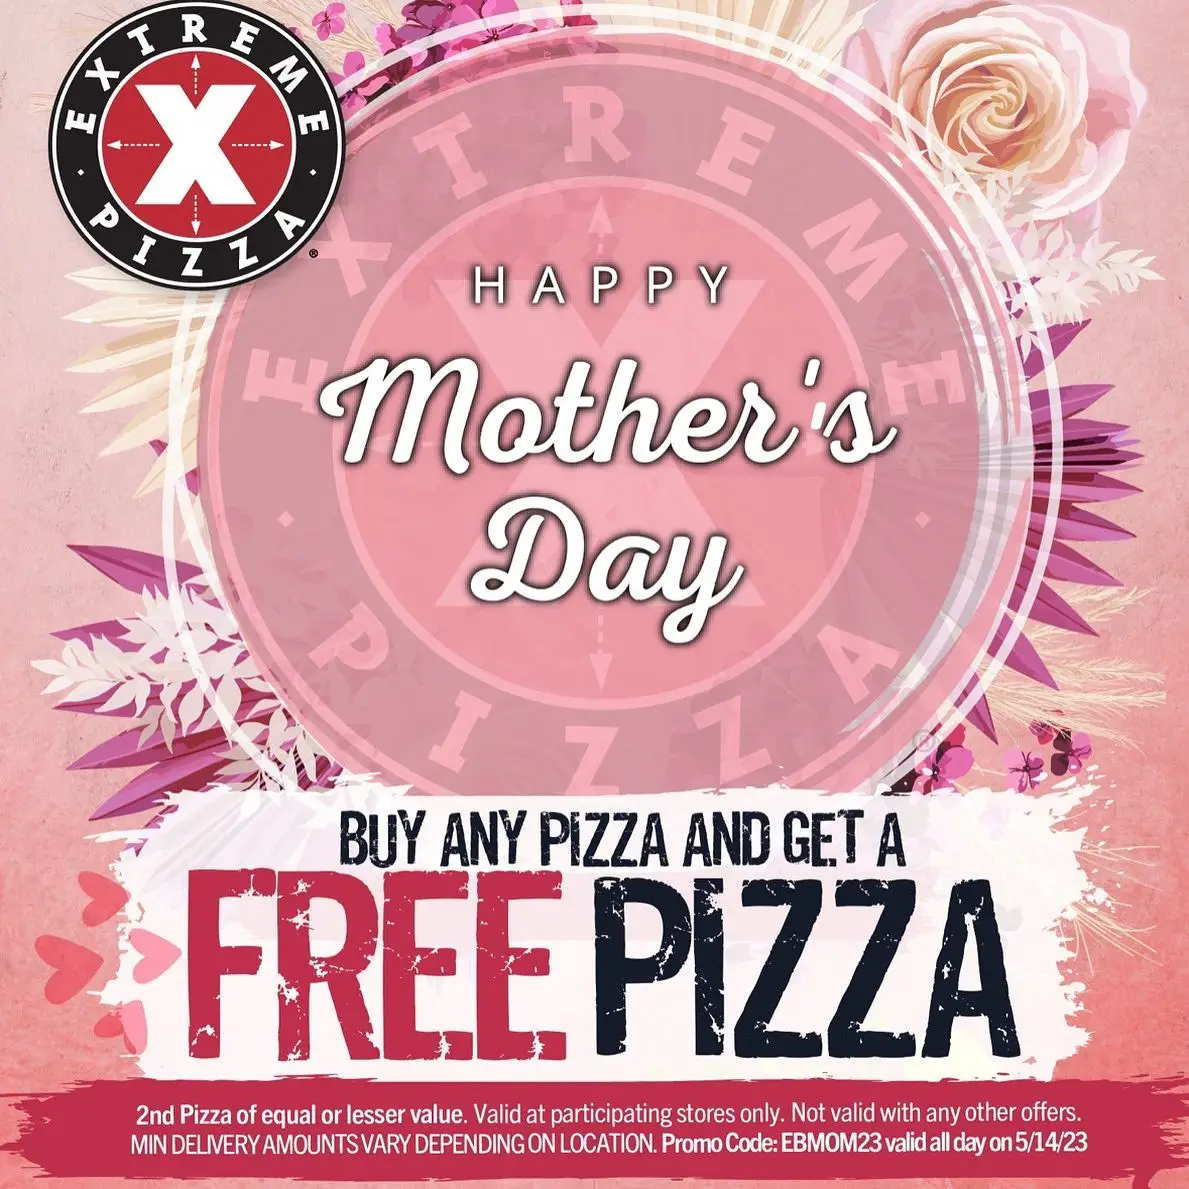 Extreme Pizza Mothers Day [Mother's Day]  Buy ANY Pizza and Get a FREE Pizza